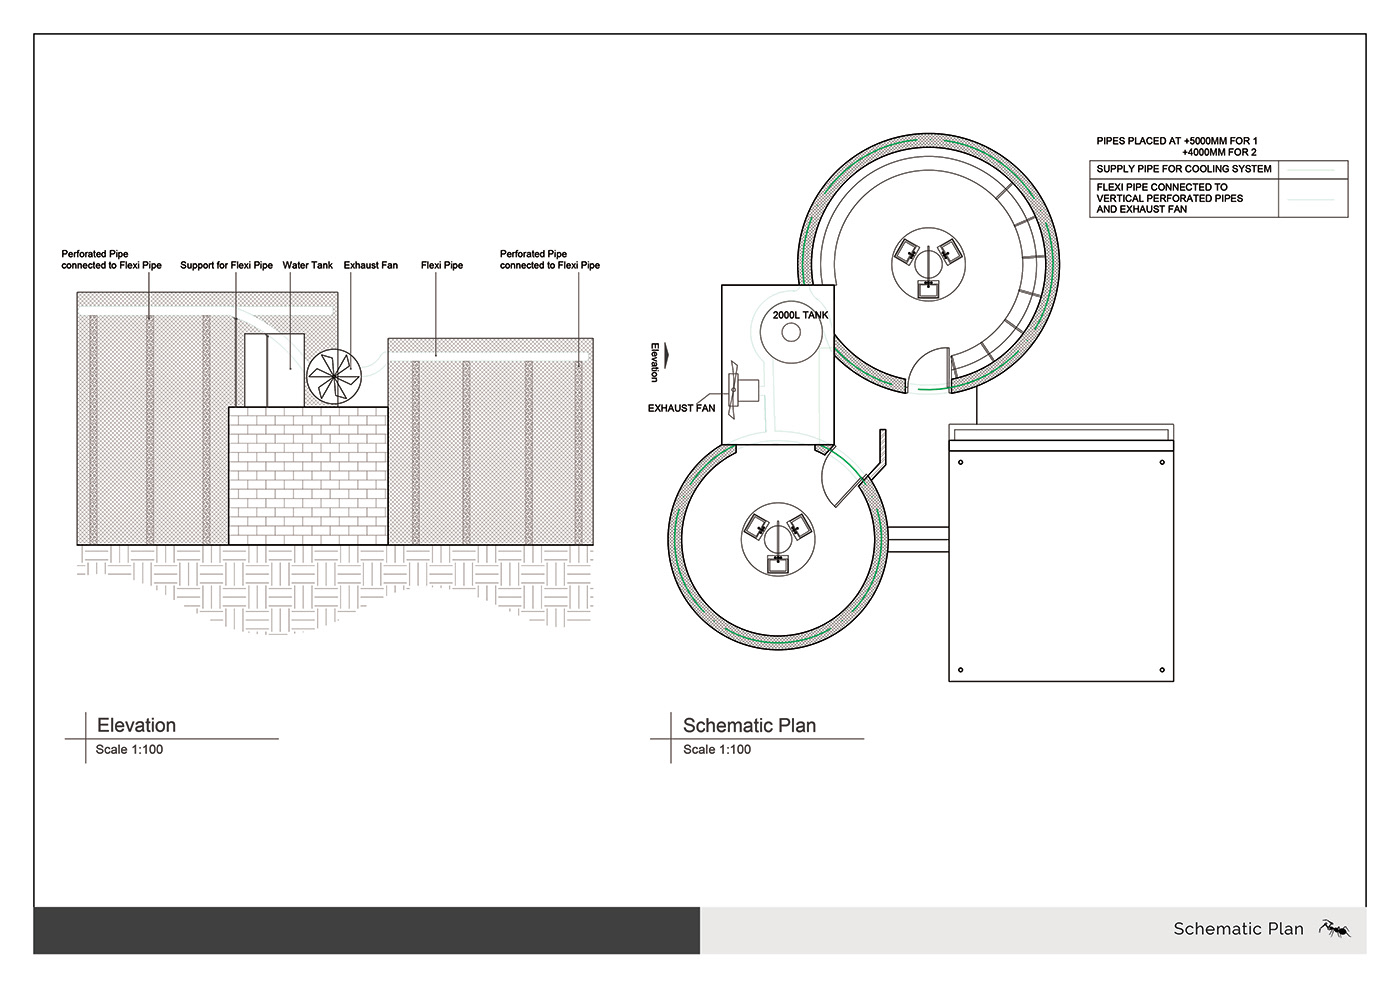 architecture research energy efficiency Sustainability environment